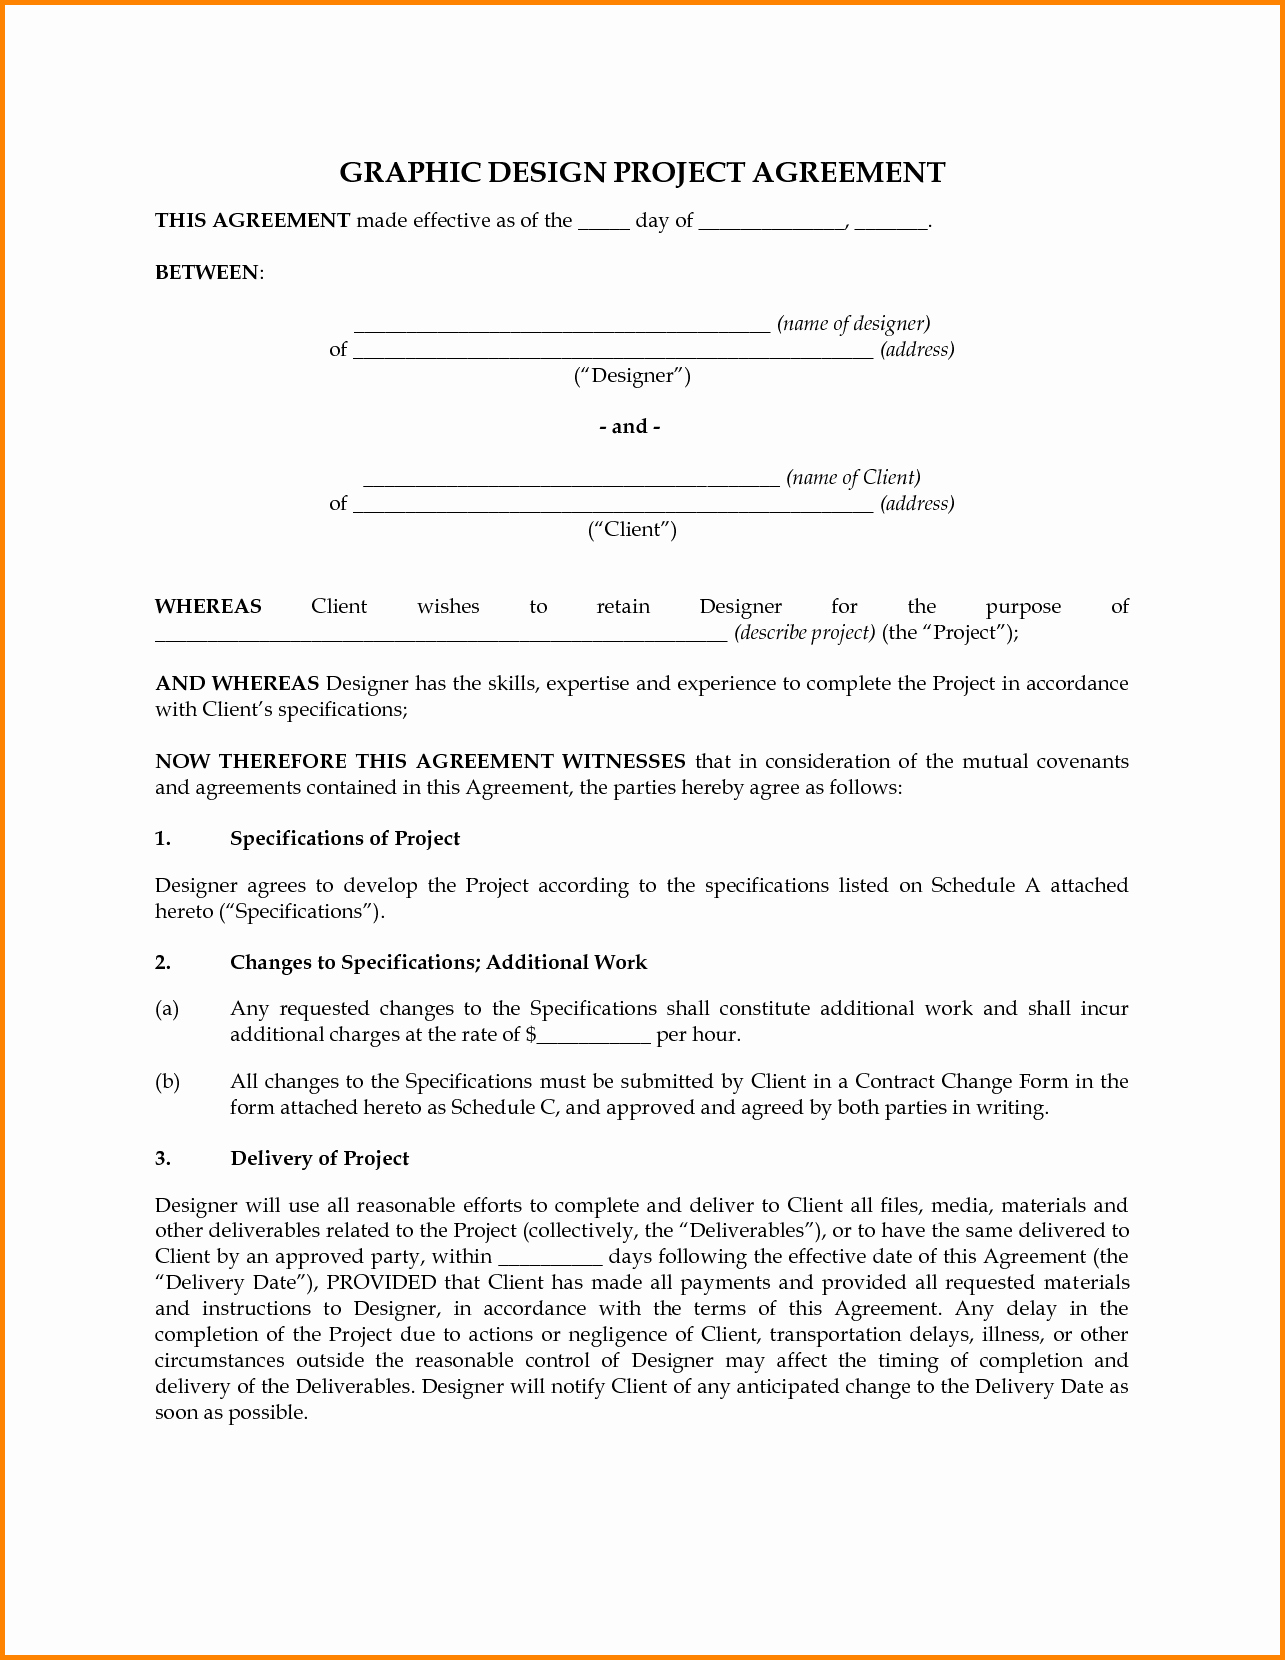 Sample Interior Design Contract Letter Agreement